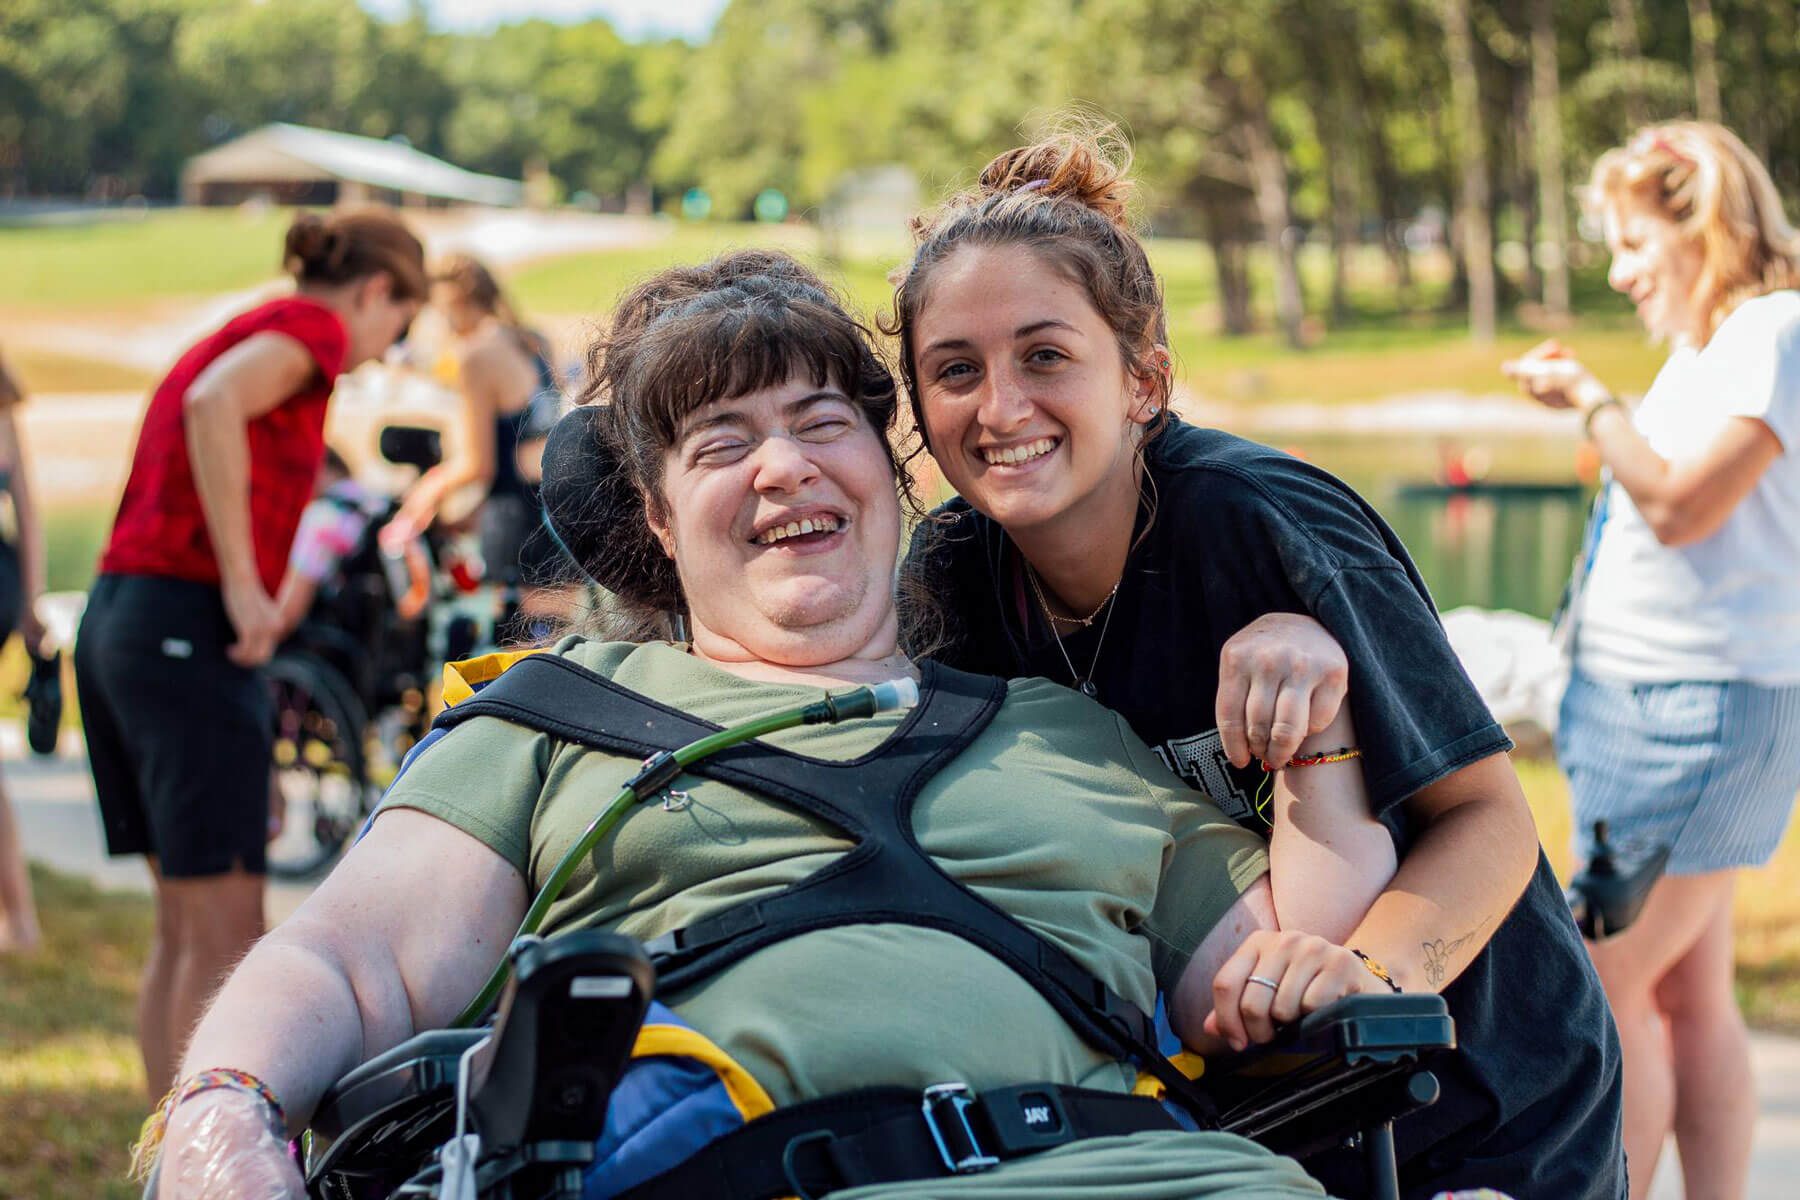 Camp counselor smiling with a camper in a wheelchair with trees and lake in the background